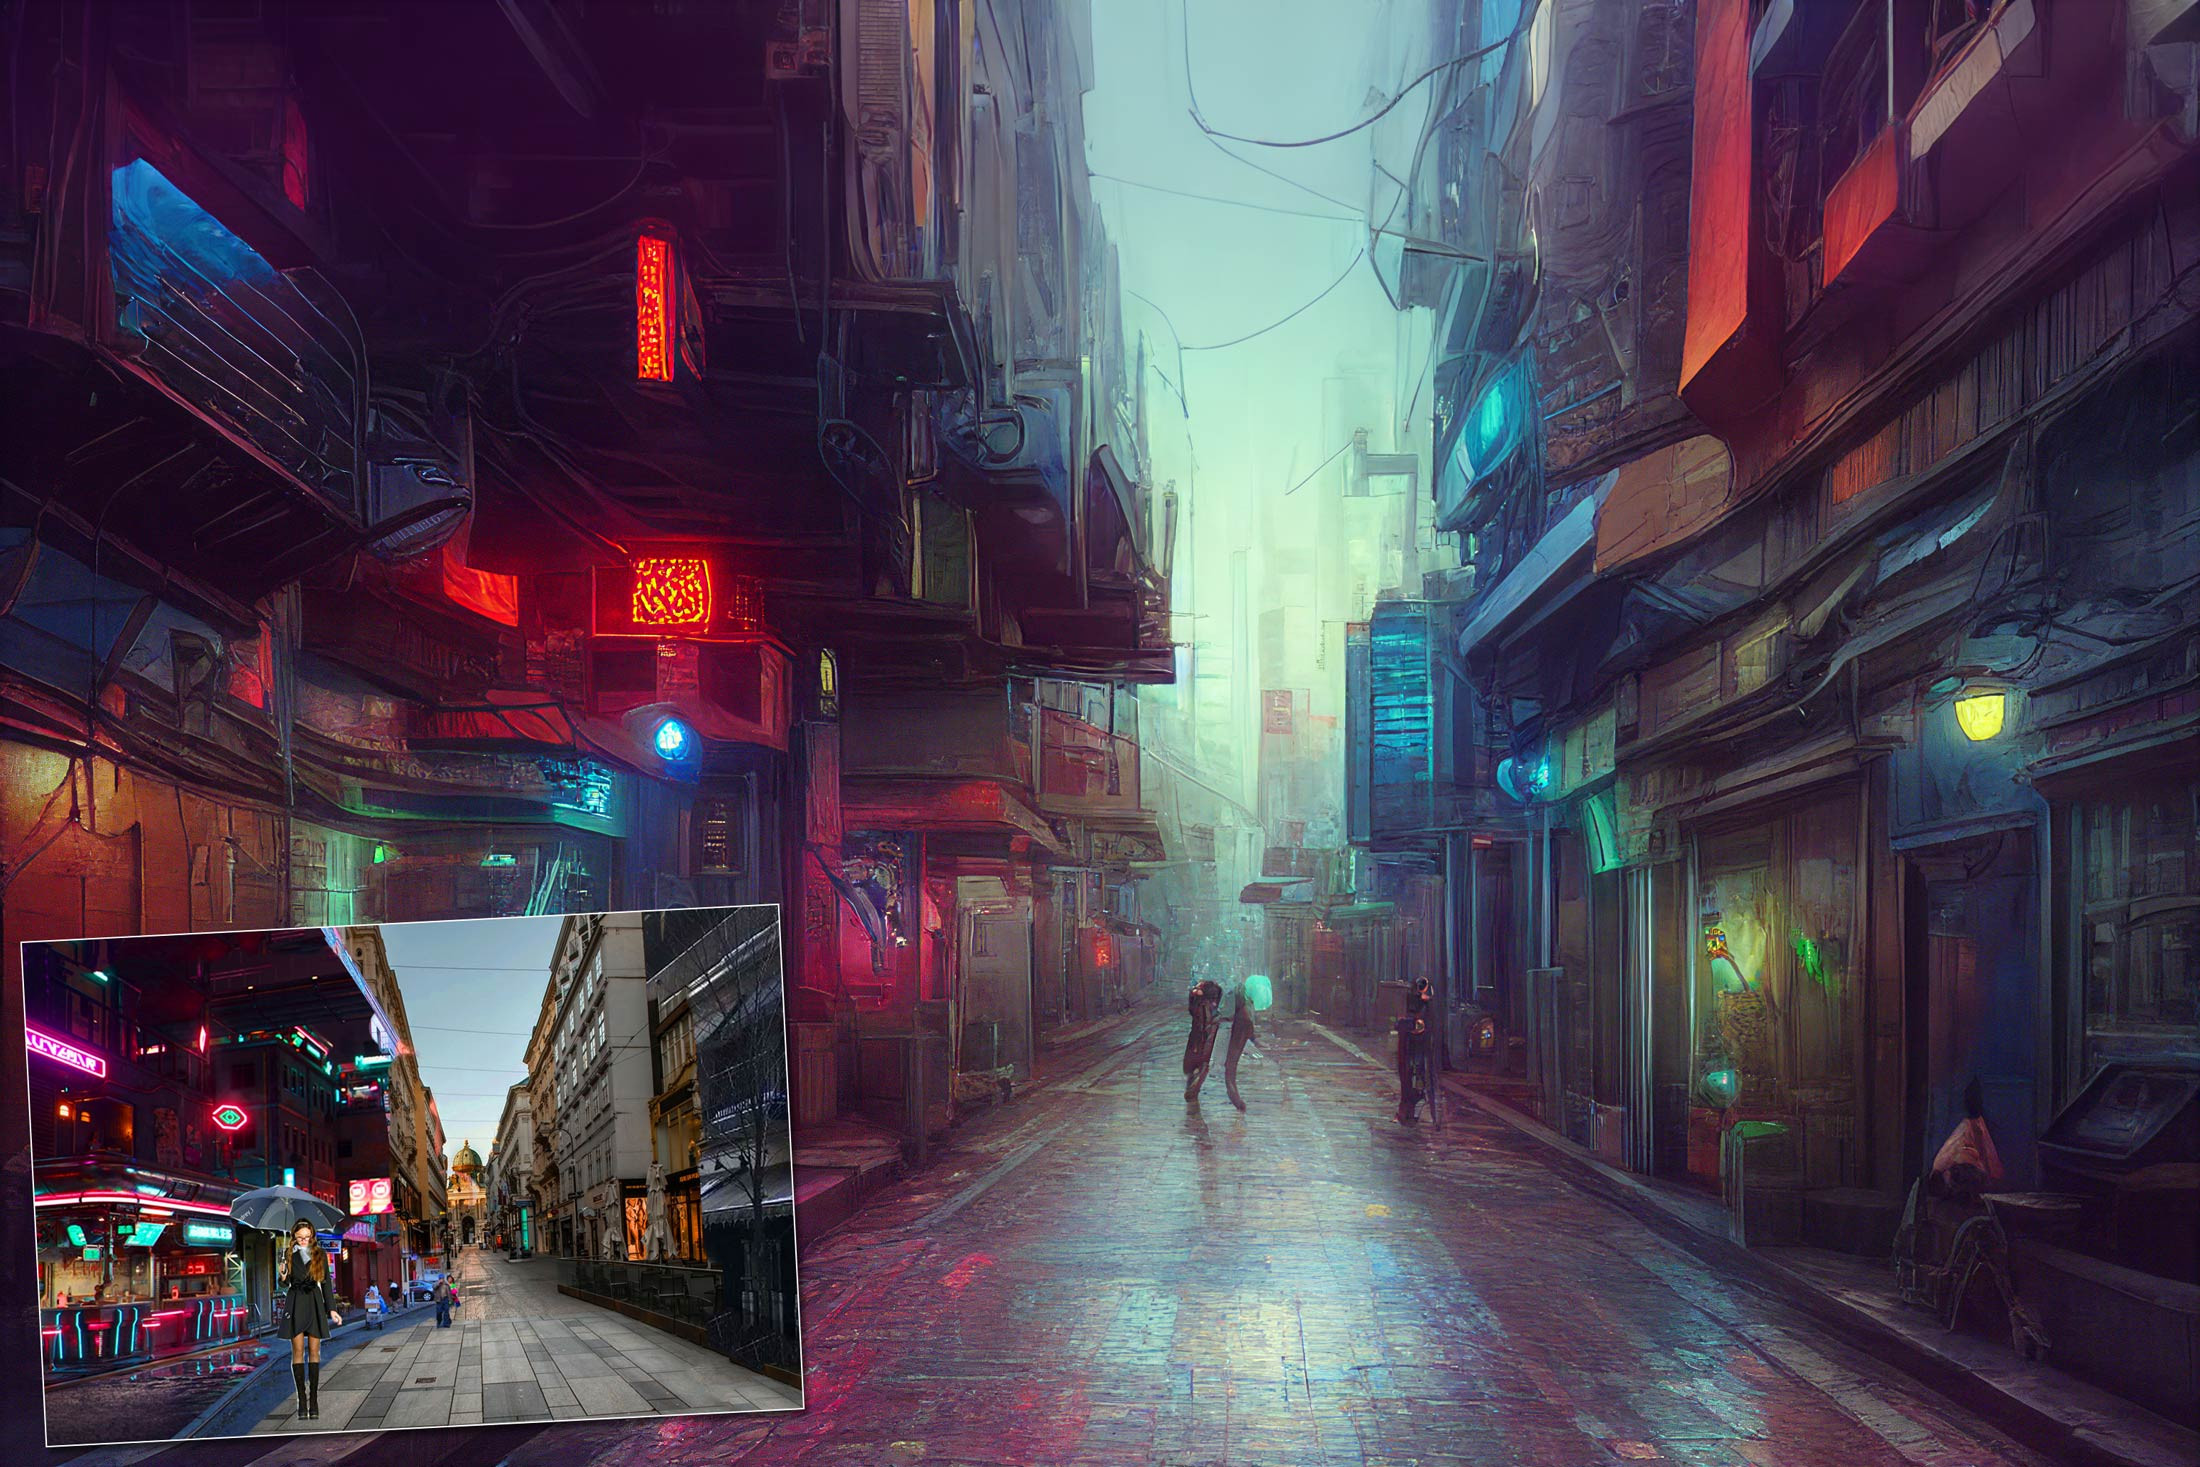 Environment studies for game design with the help of Photoshop collages.